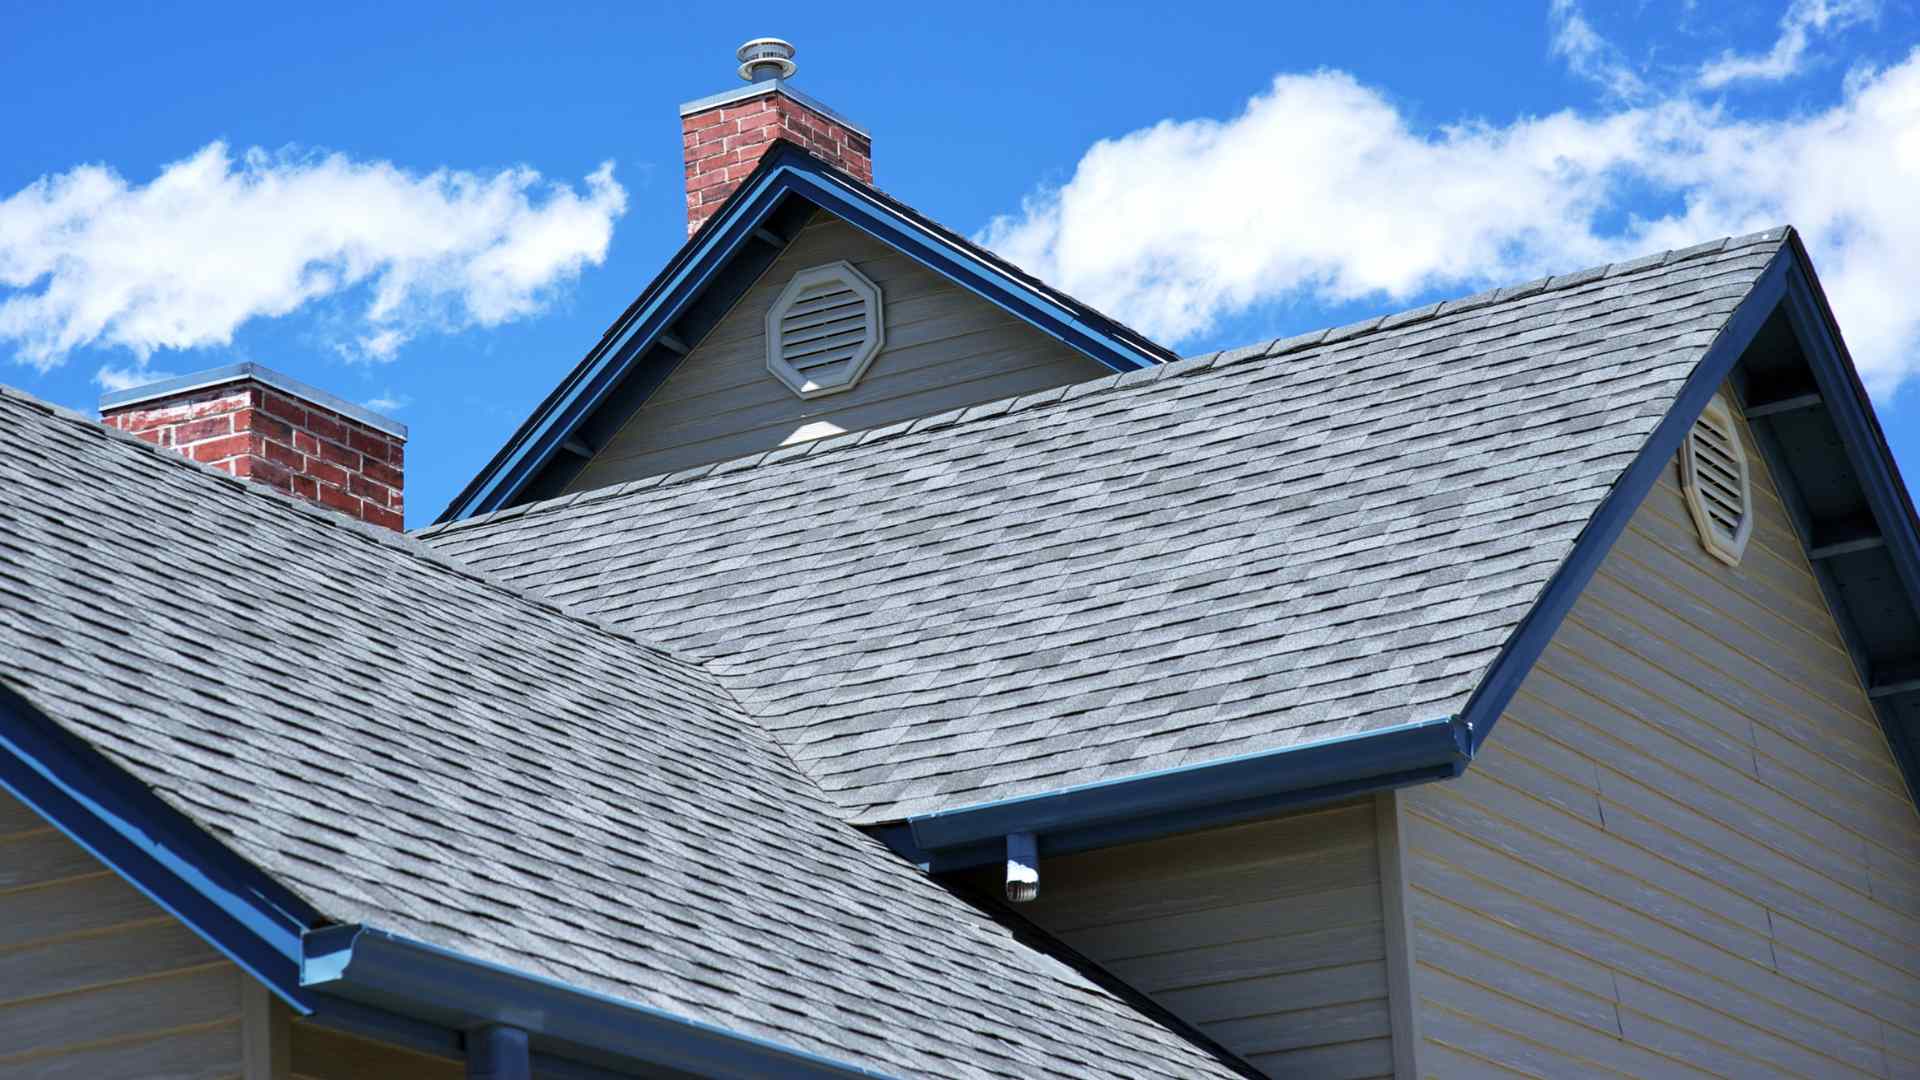 Siding and Roofing Services in Scottsdale AZ